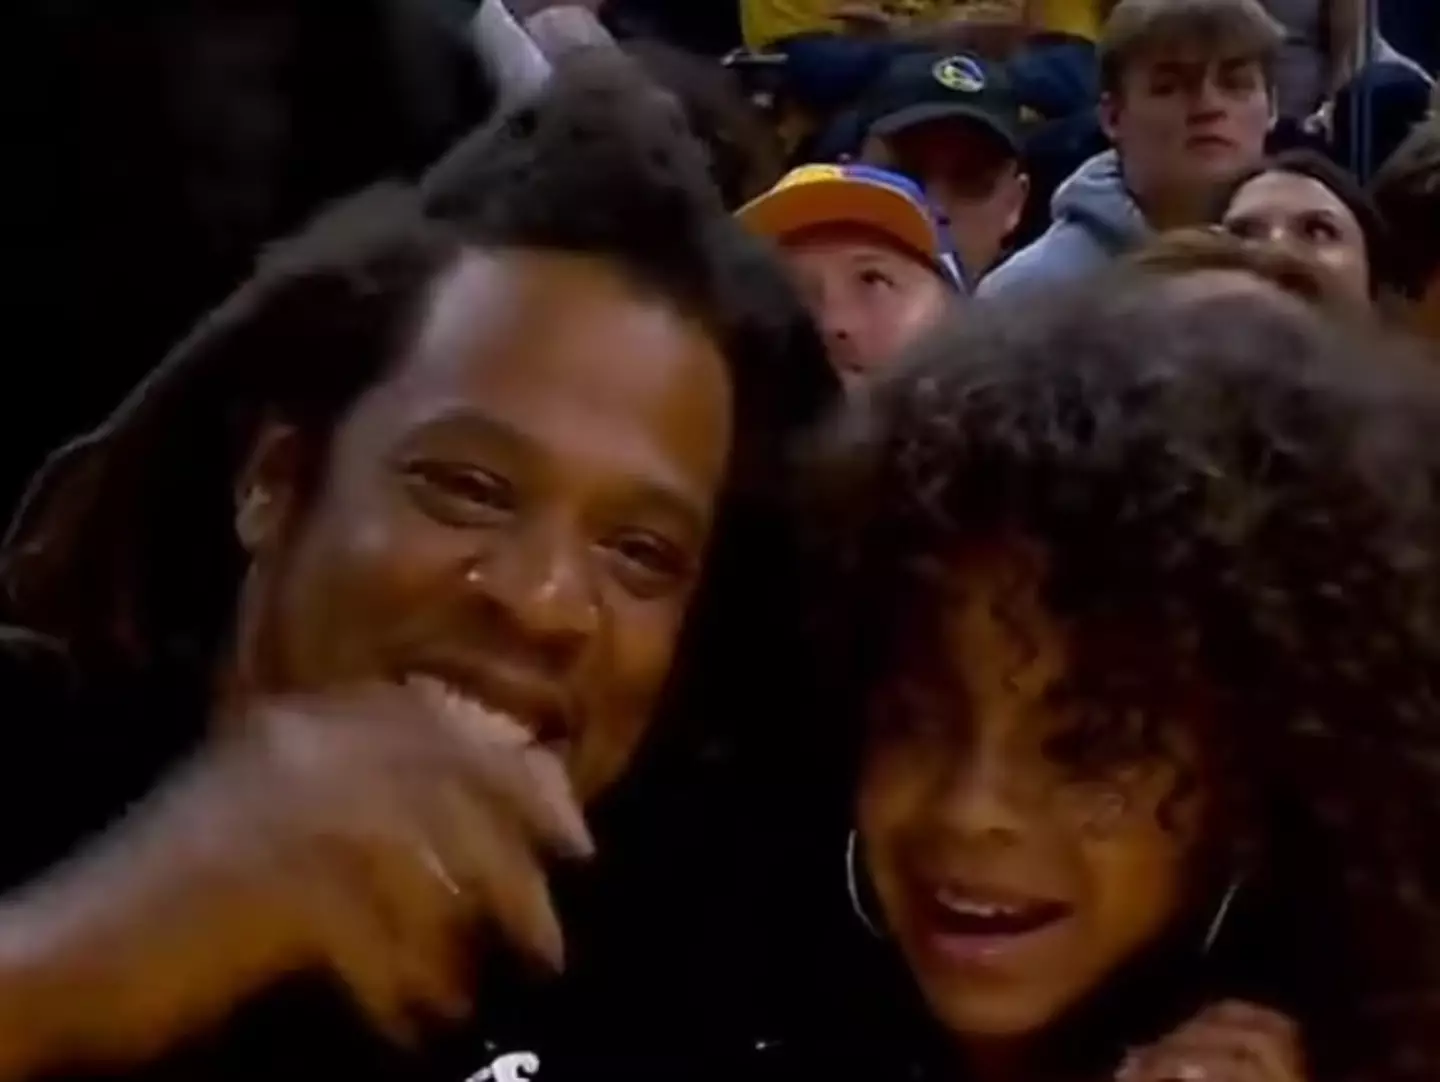 Blue attended the NBA finals with her dad Jay Z.